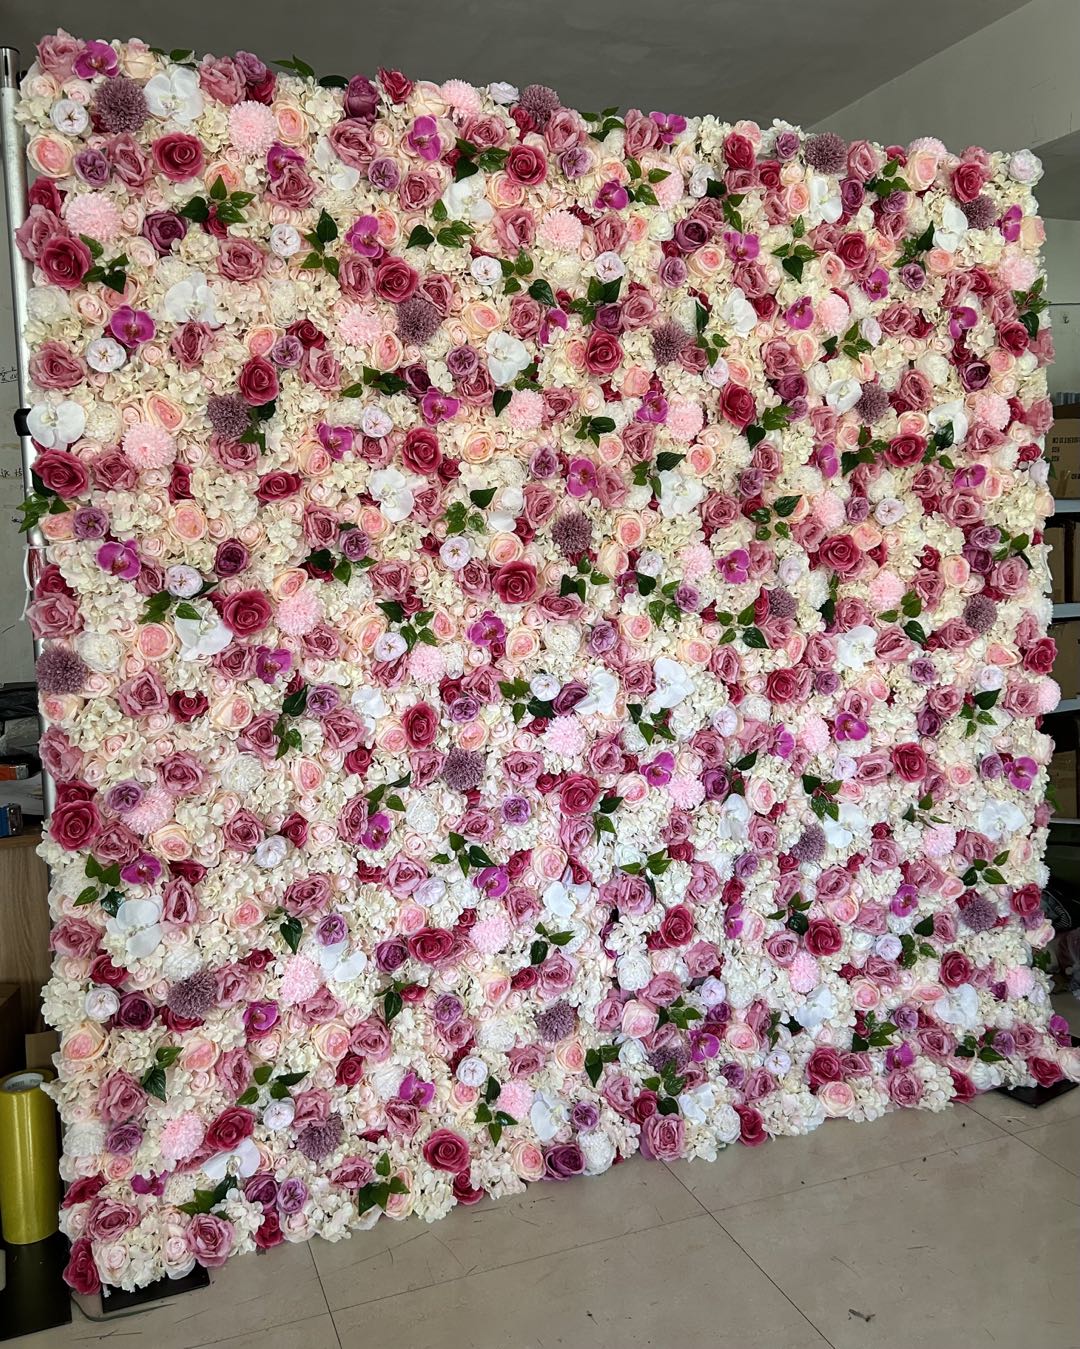 The rose pink fabric artificial flower wall looks gentle and lovely.